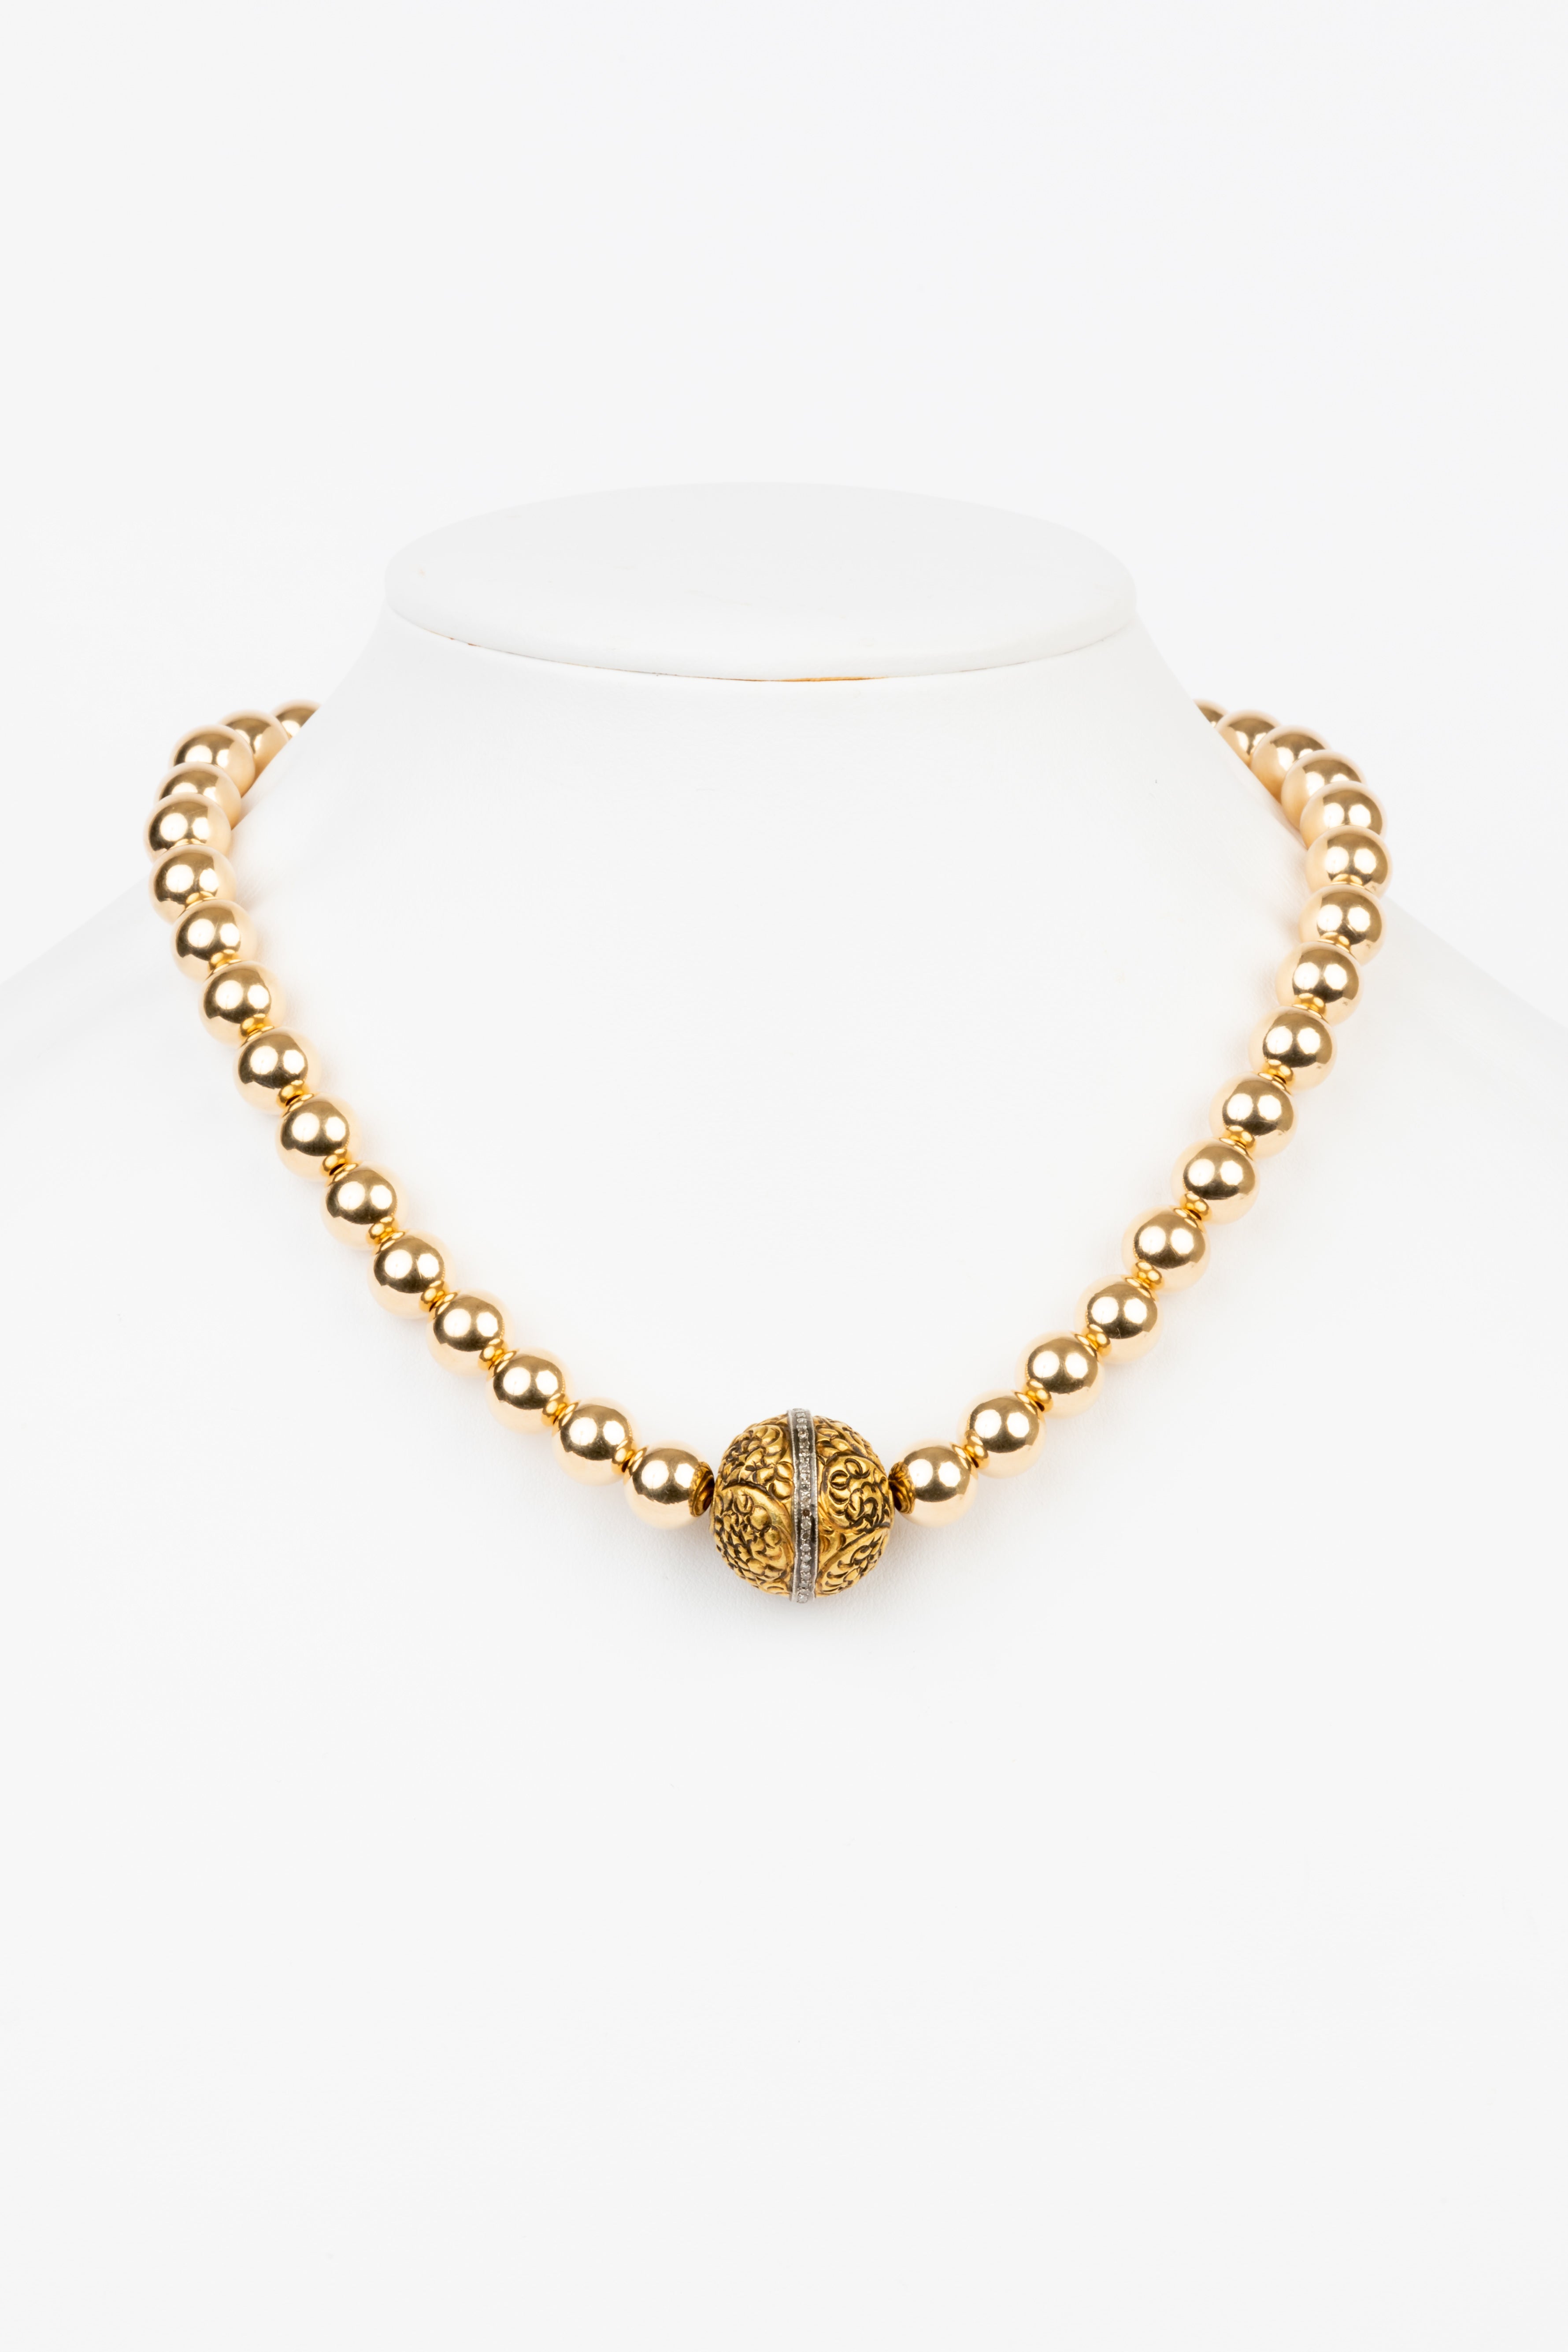 Pave Diamond, 10 MM Gold Filled Bead Necklace